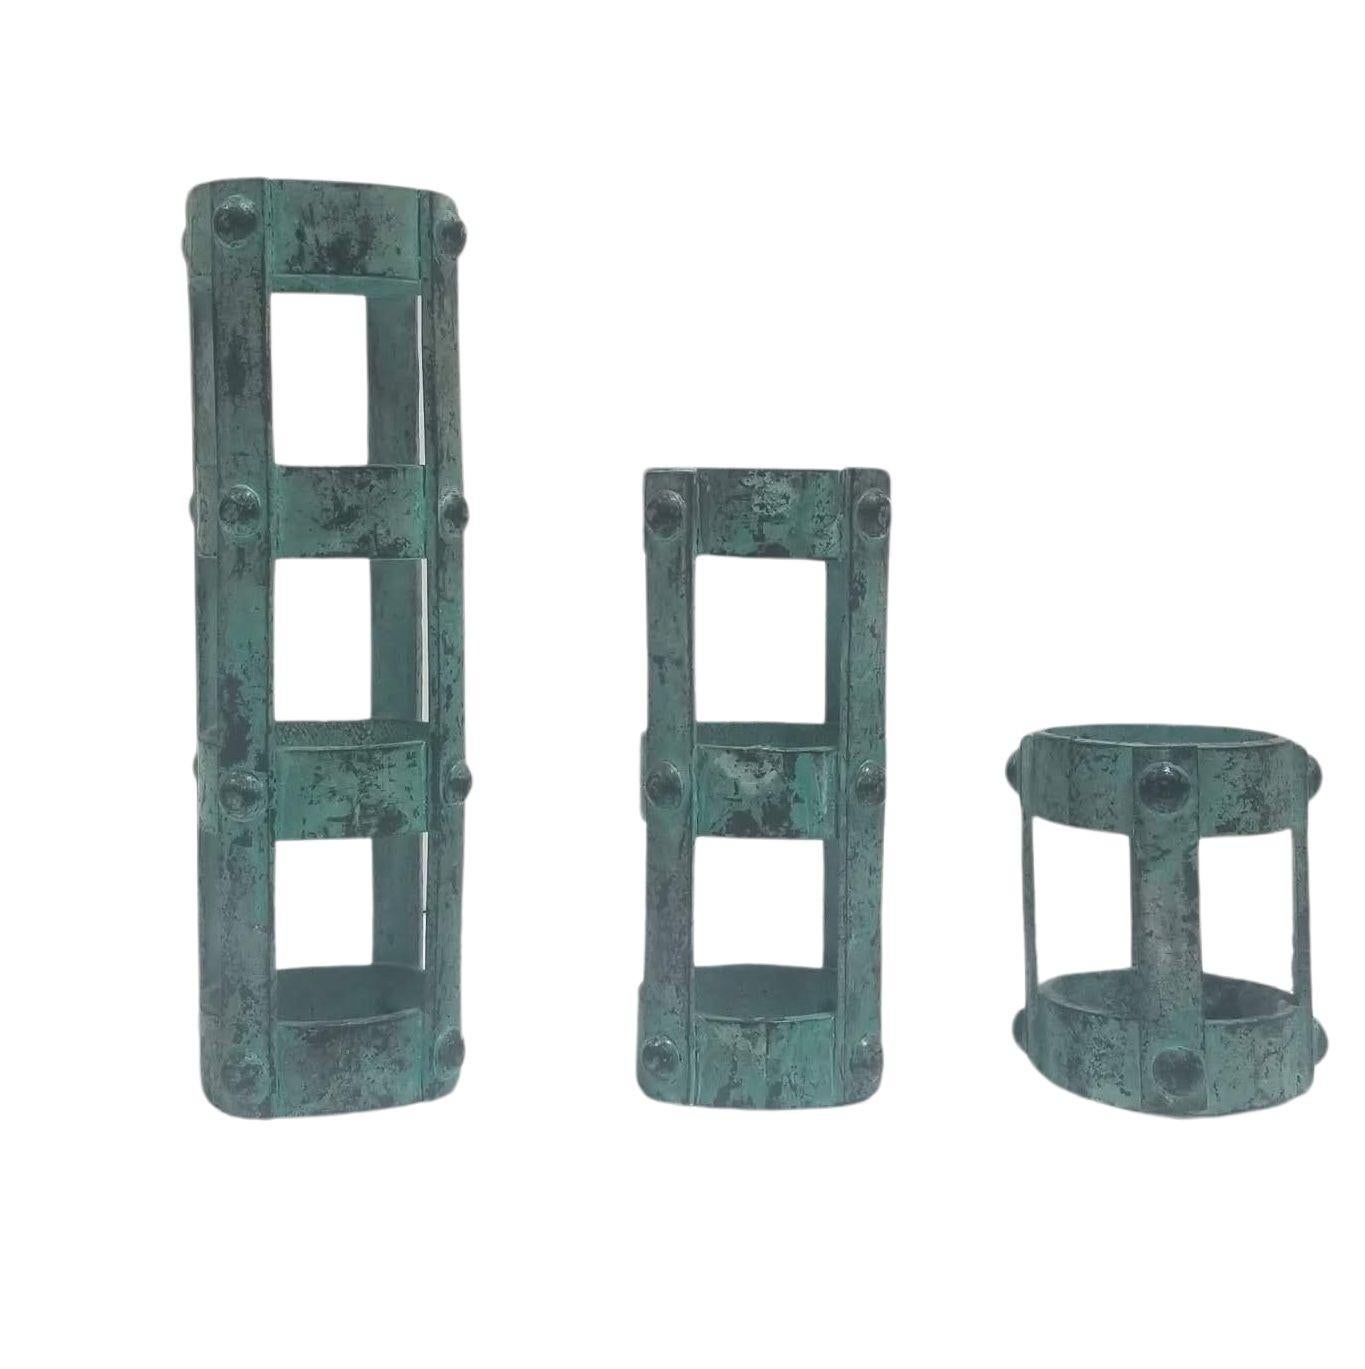 20th Century Set of 3 Brutalist style Candlestick Holders Cage Design